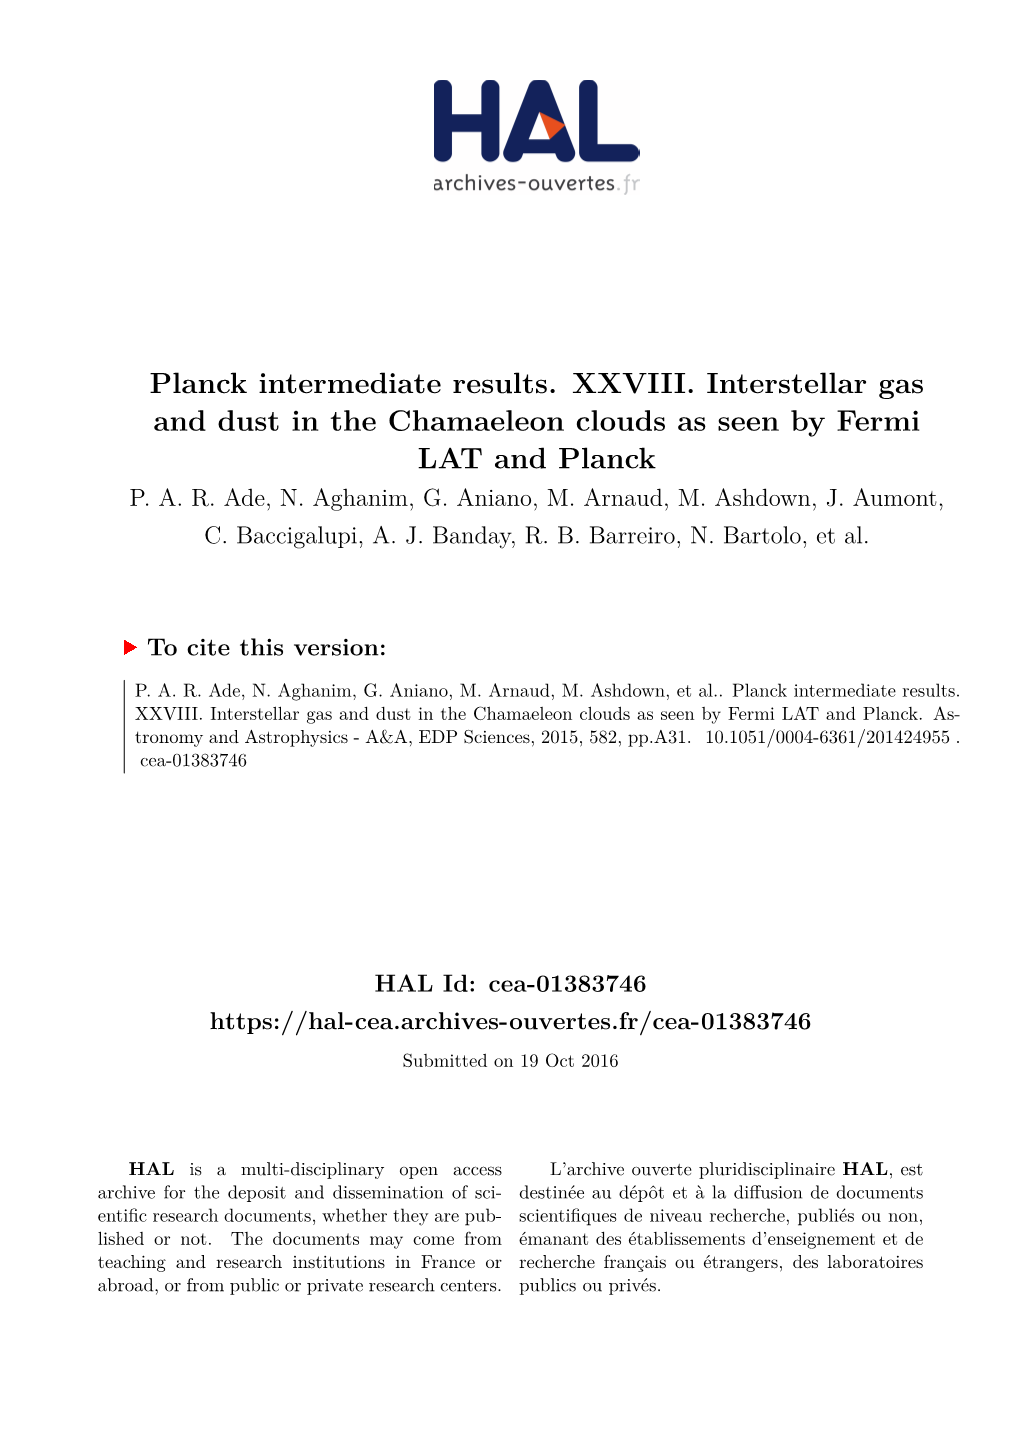 Planck Intermediate Results. XXVIII. Interstellar Gas and Dust in the Chamaeleon Clouds As Seen by Fermi LAT and Planck P